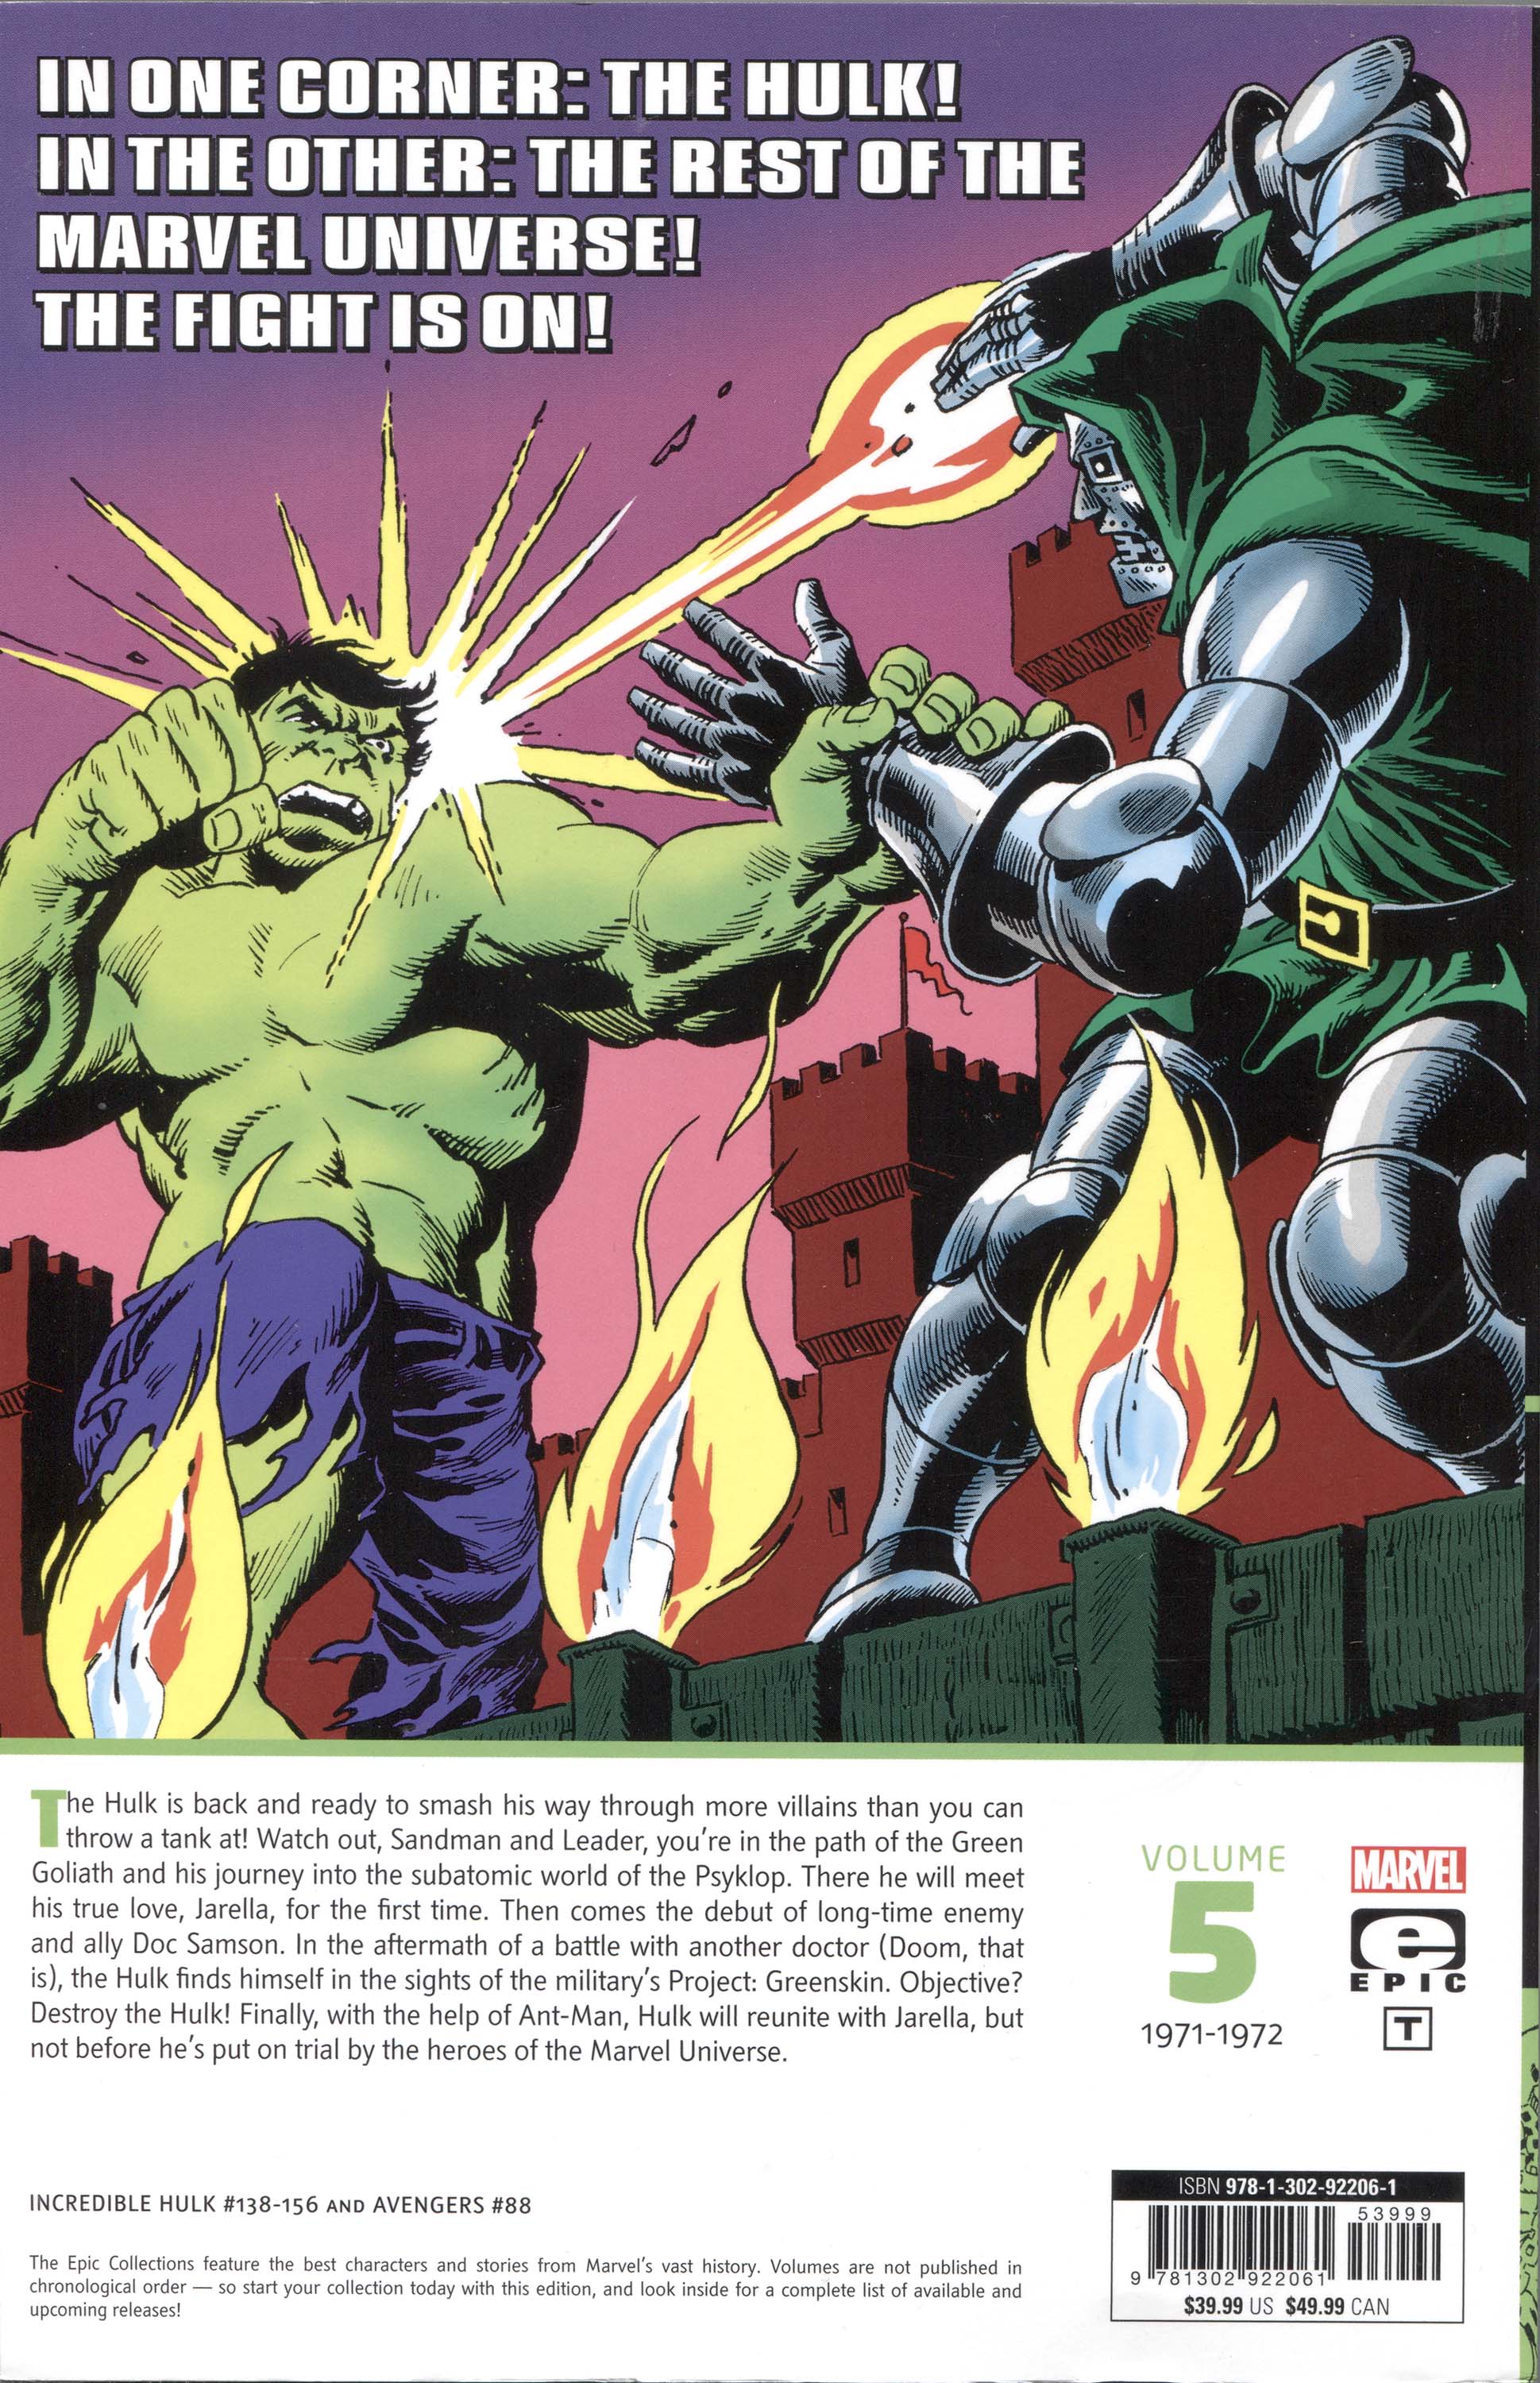 Incredible Hulk Epic Collection 5, back cover, art by Herb Trimpe